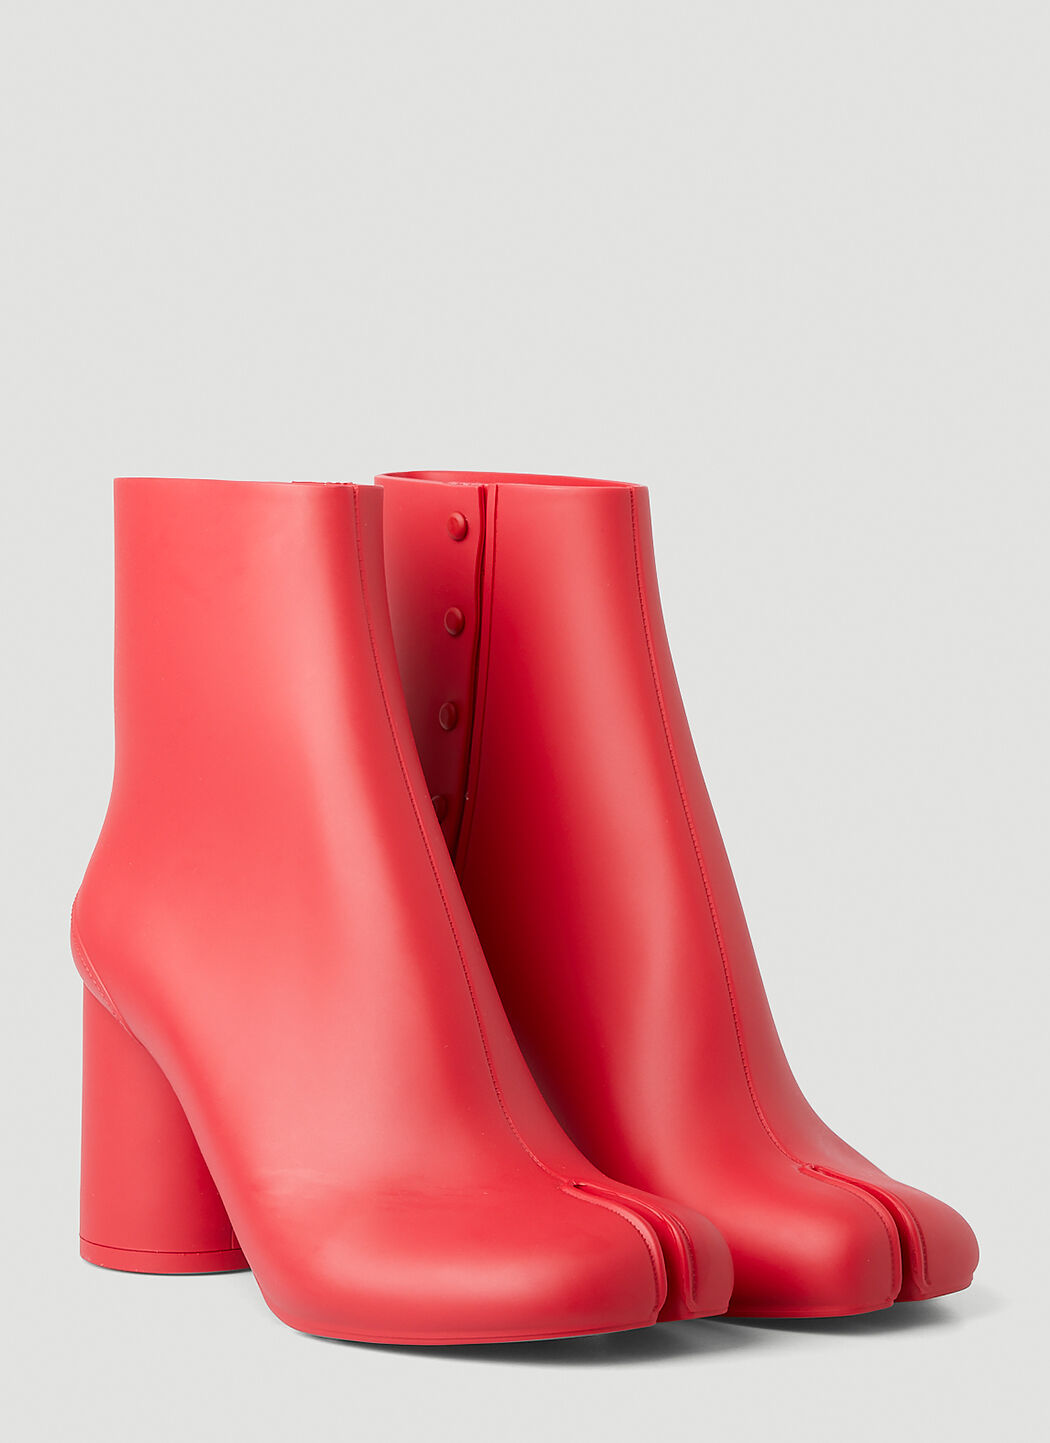 Maison Margiela Women's Tabi Rubber Ankle Boots in Red | LN-CC®